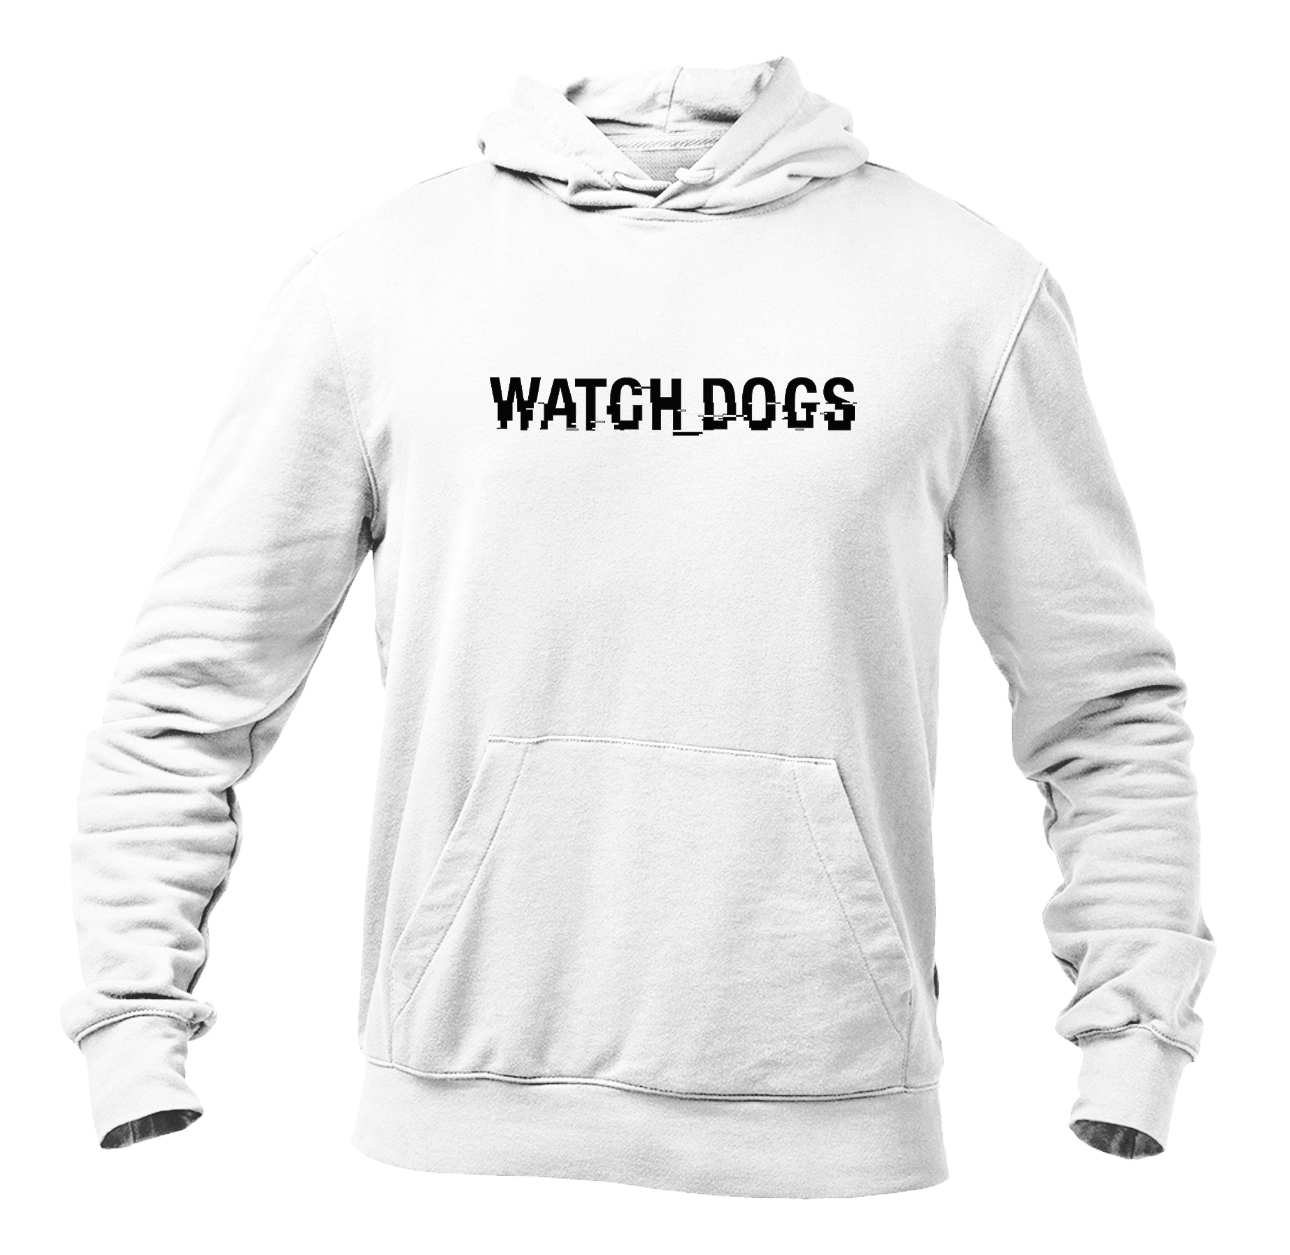 Men's Watch Dogs Video Game Pullover Hoodie